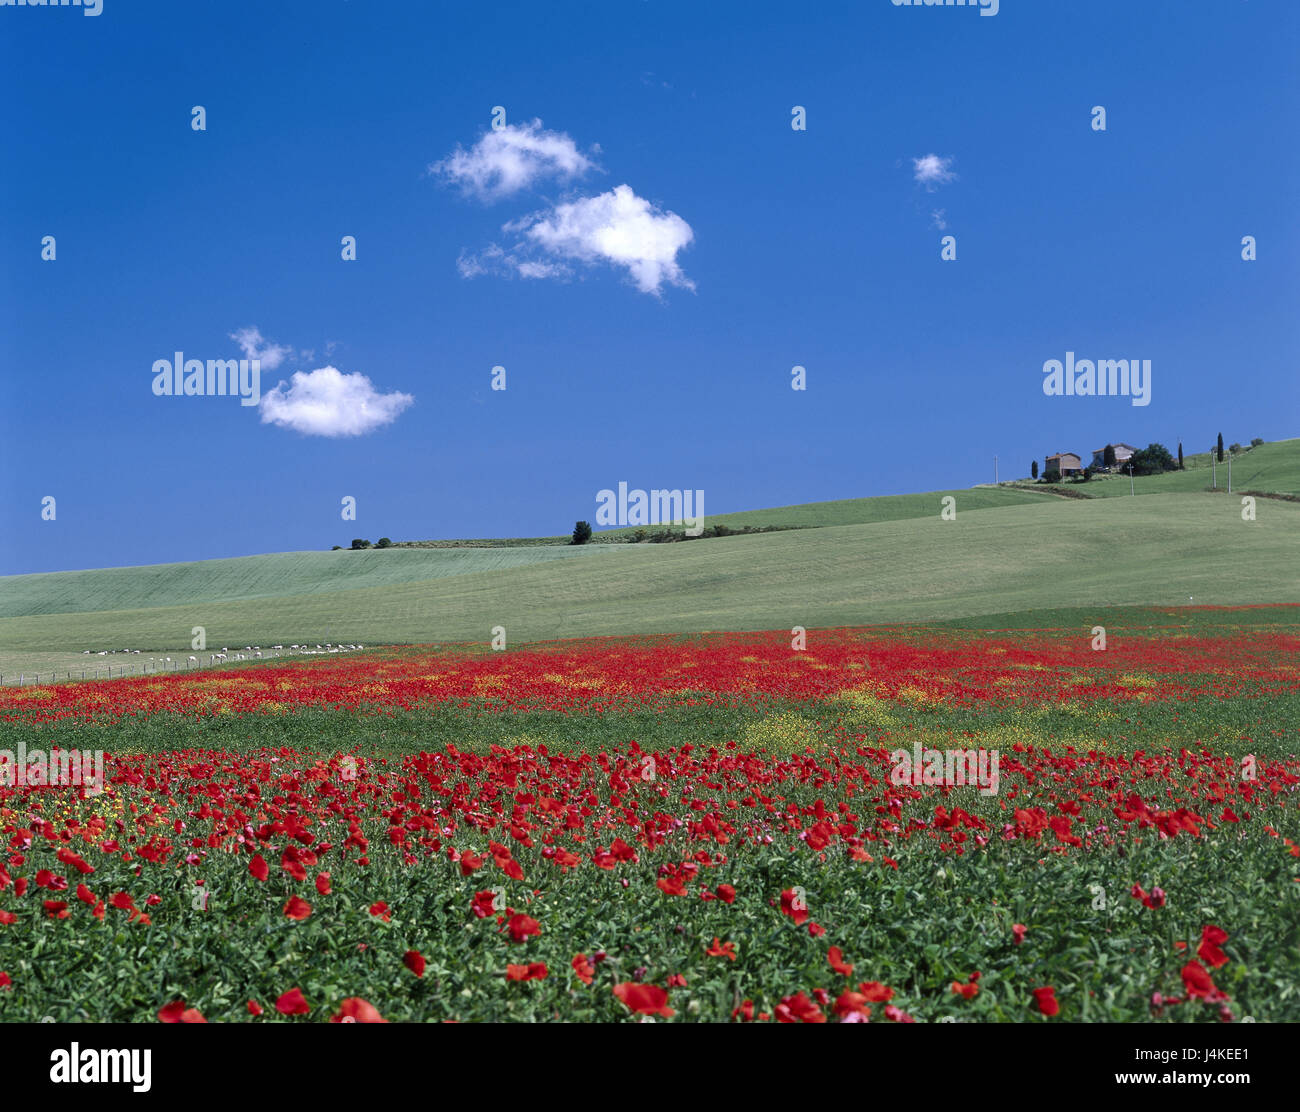 Italy, Tuscany, hill scenery, residential house, poppies Europe, province, scenery, hill, meadows, fields, house, court, trees, flowers, poppy seed, Papaver spec. blossom, pasture, sheep, flock of sheep, sky, landscape, typically, Toskanian Stock Photo